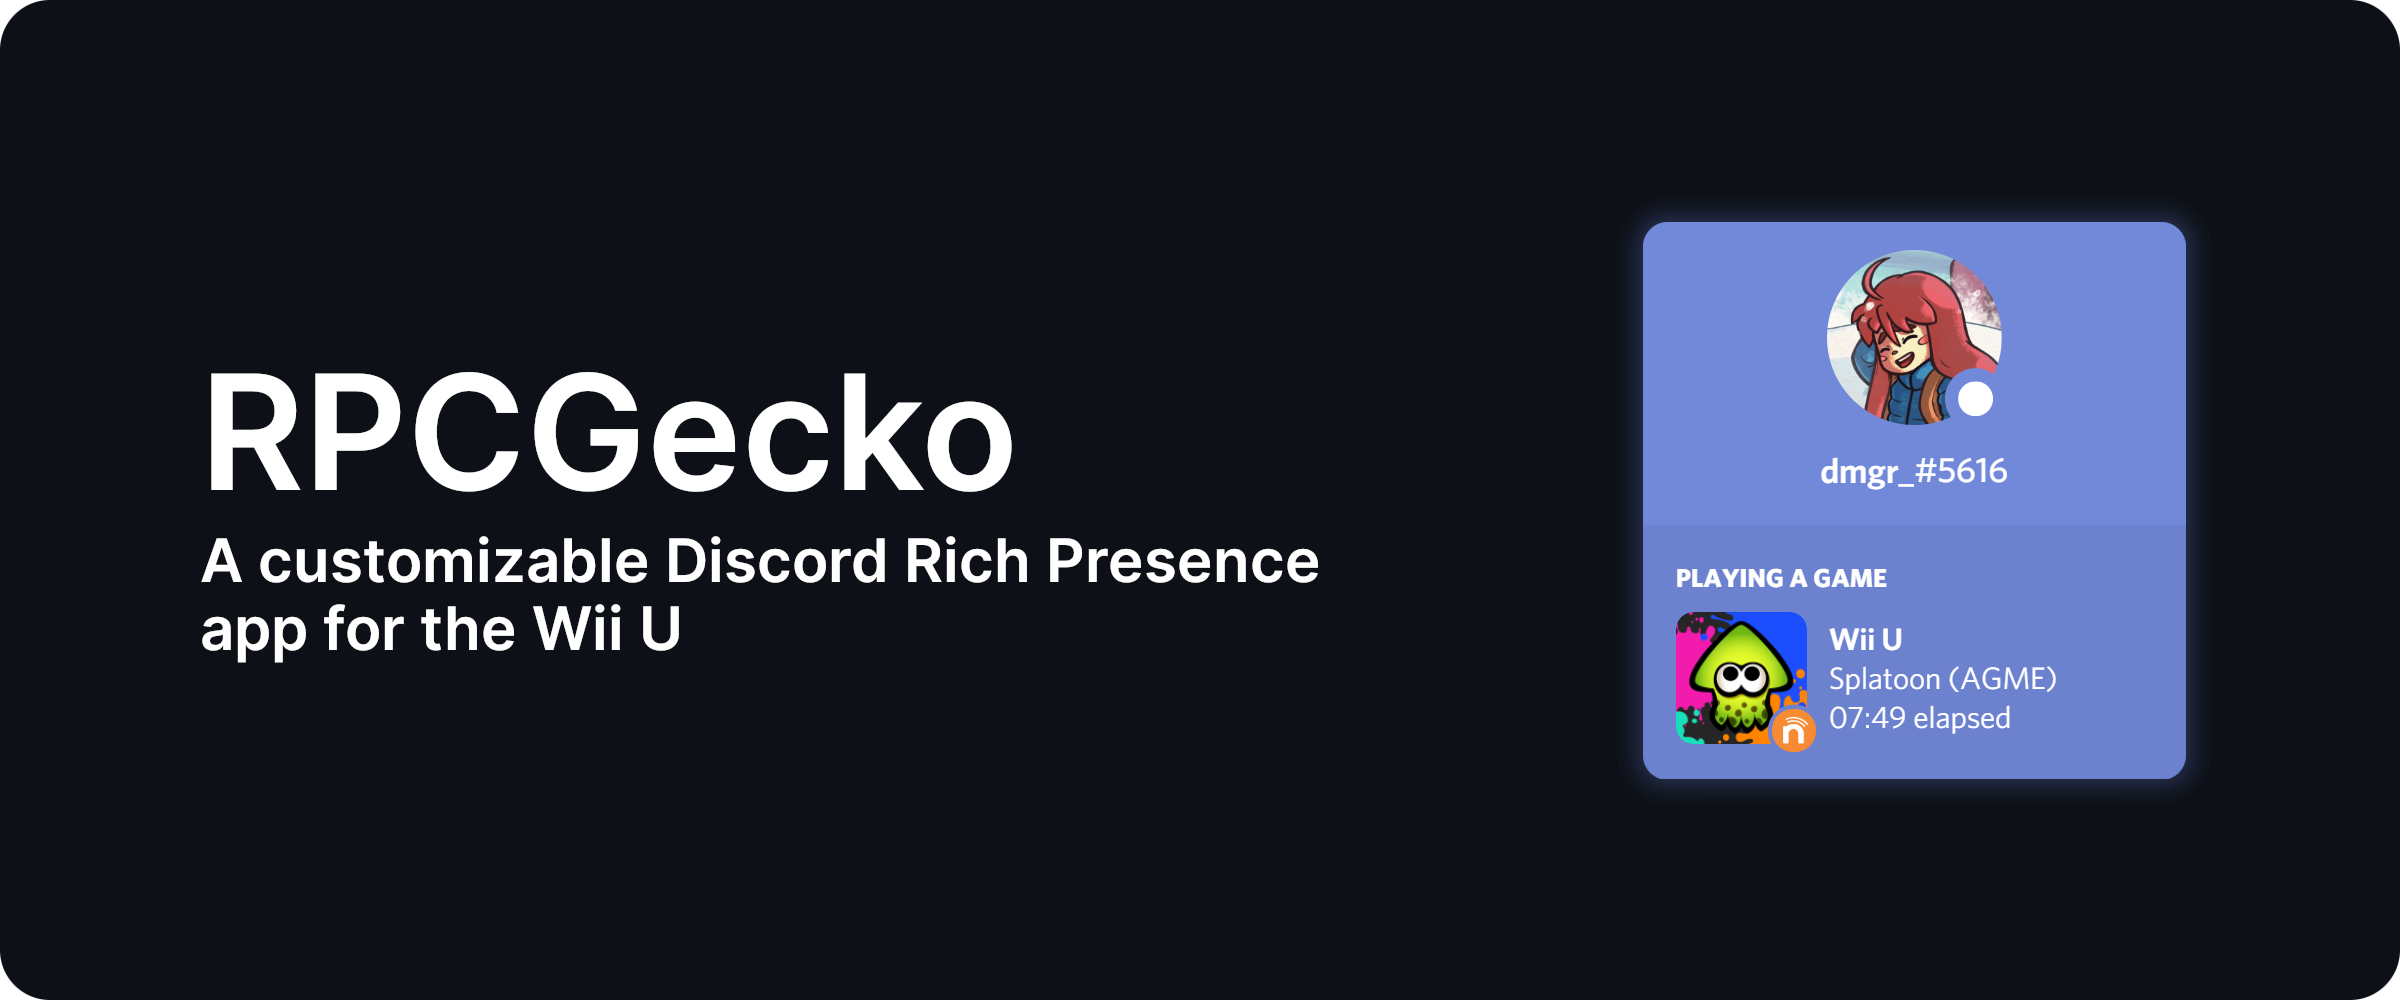 RPCGecko - a configurable Discord Rich Presence app for the Wii U